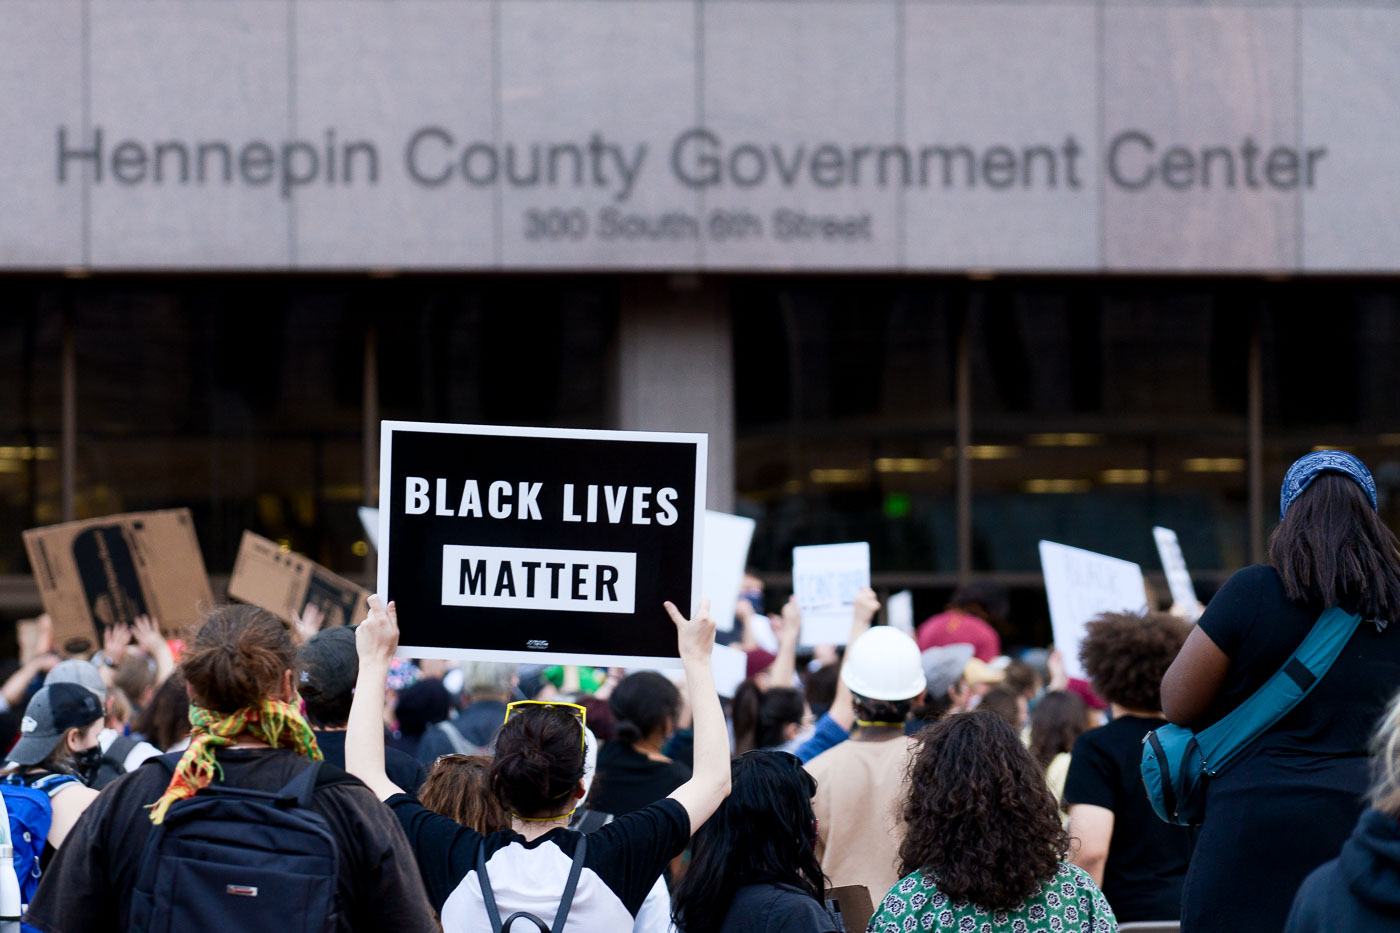 Protester holding up Black Lives Matter sign in front of courthouse